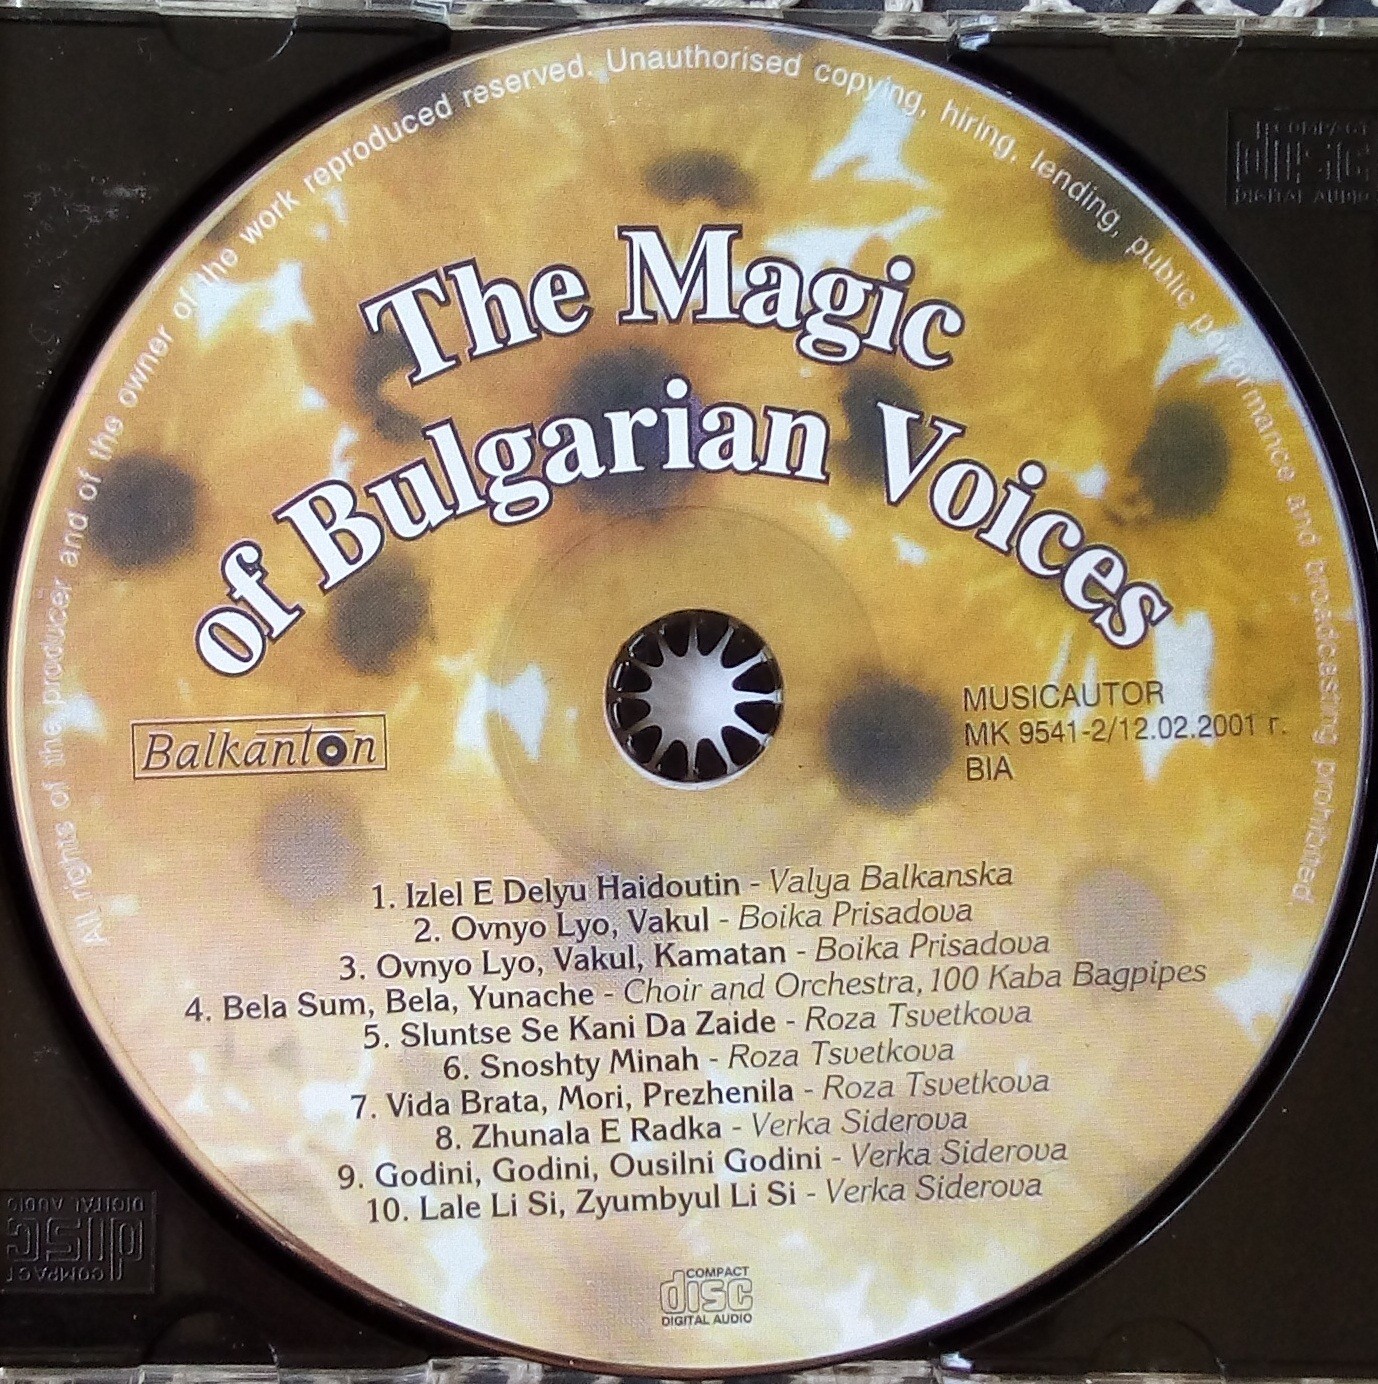 The Magic of Bulgarian Voices